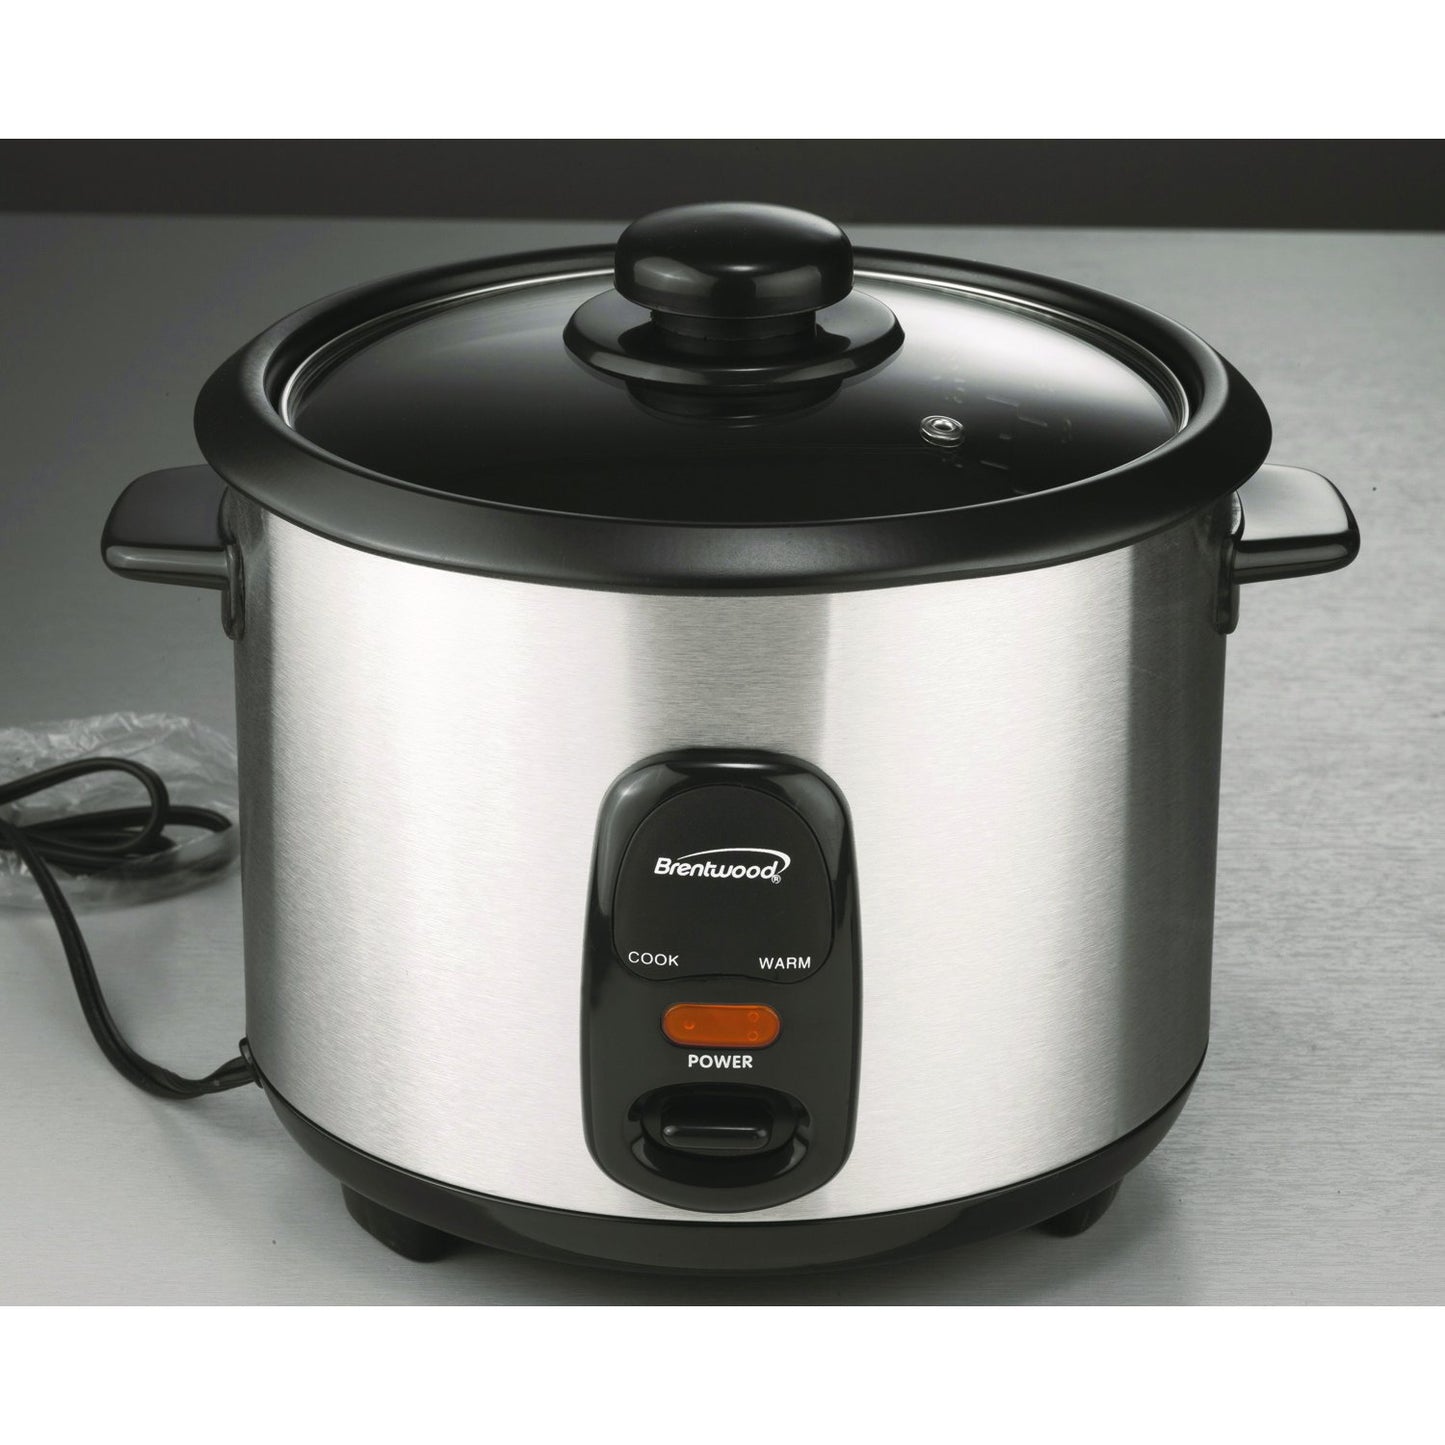 Brentwood Appl. TS-20 10-Cup Stainless Steel Rice Cooker